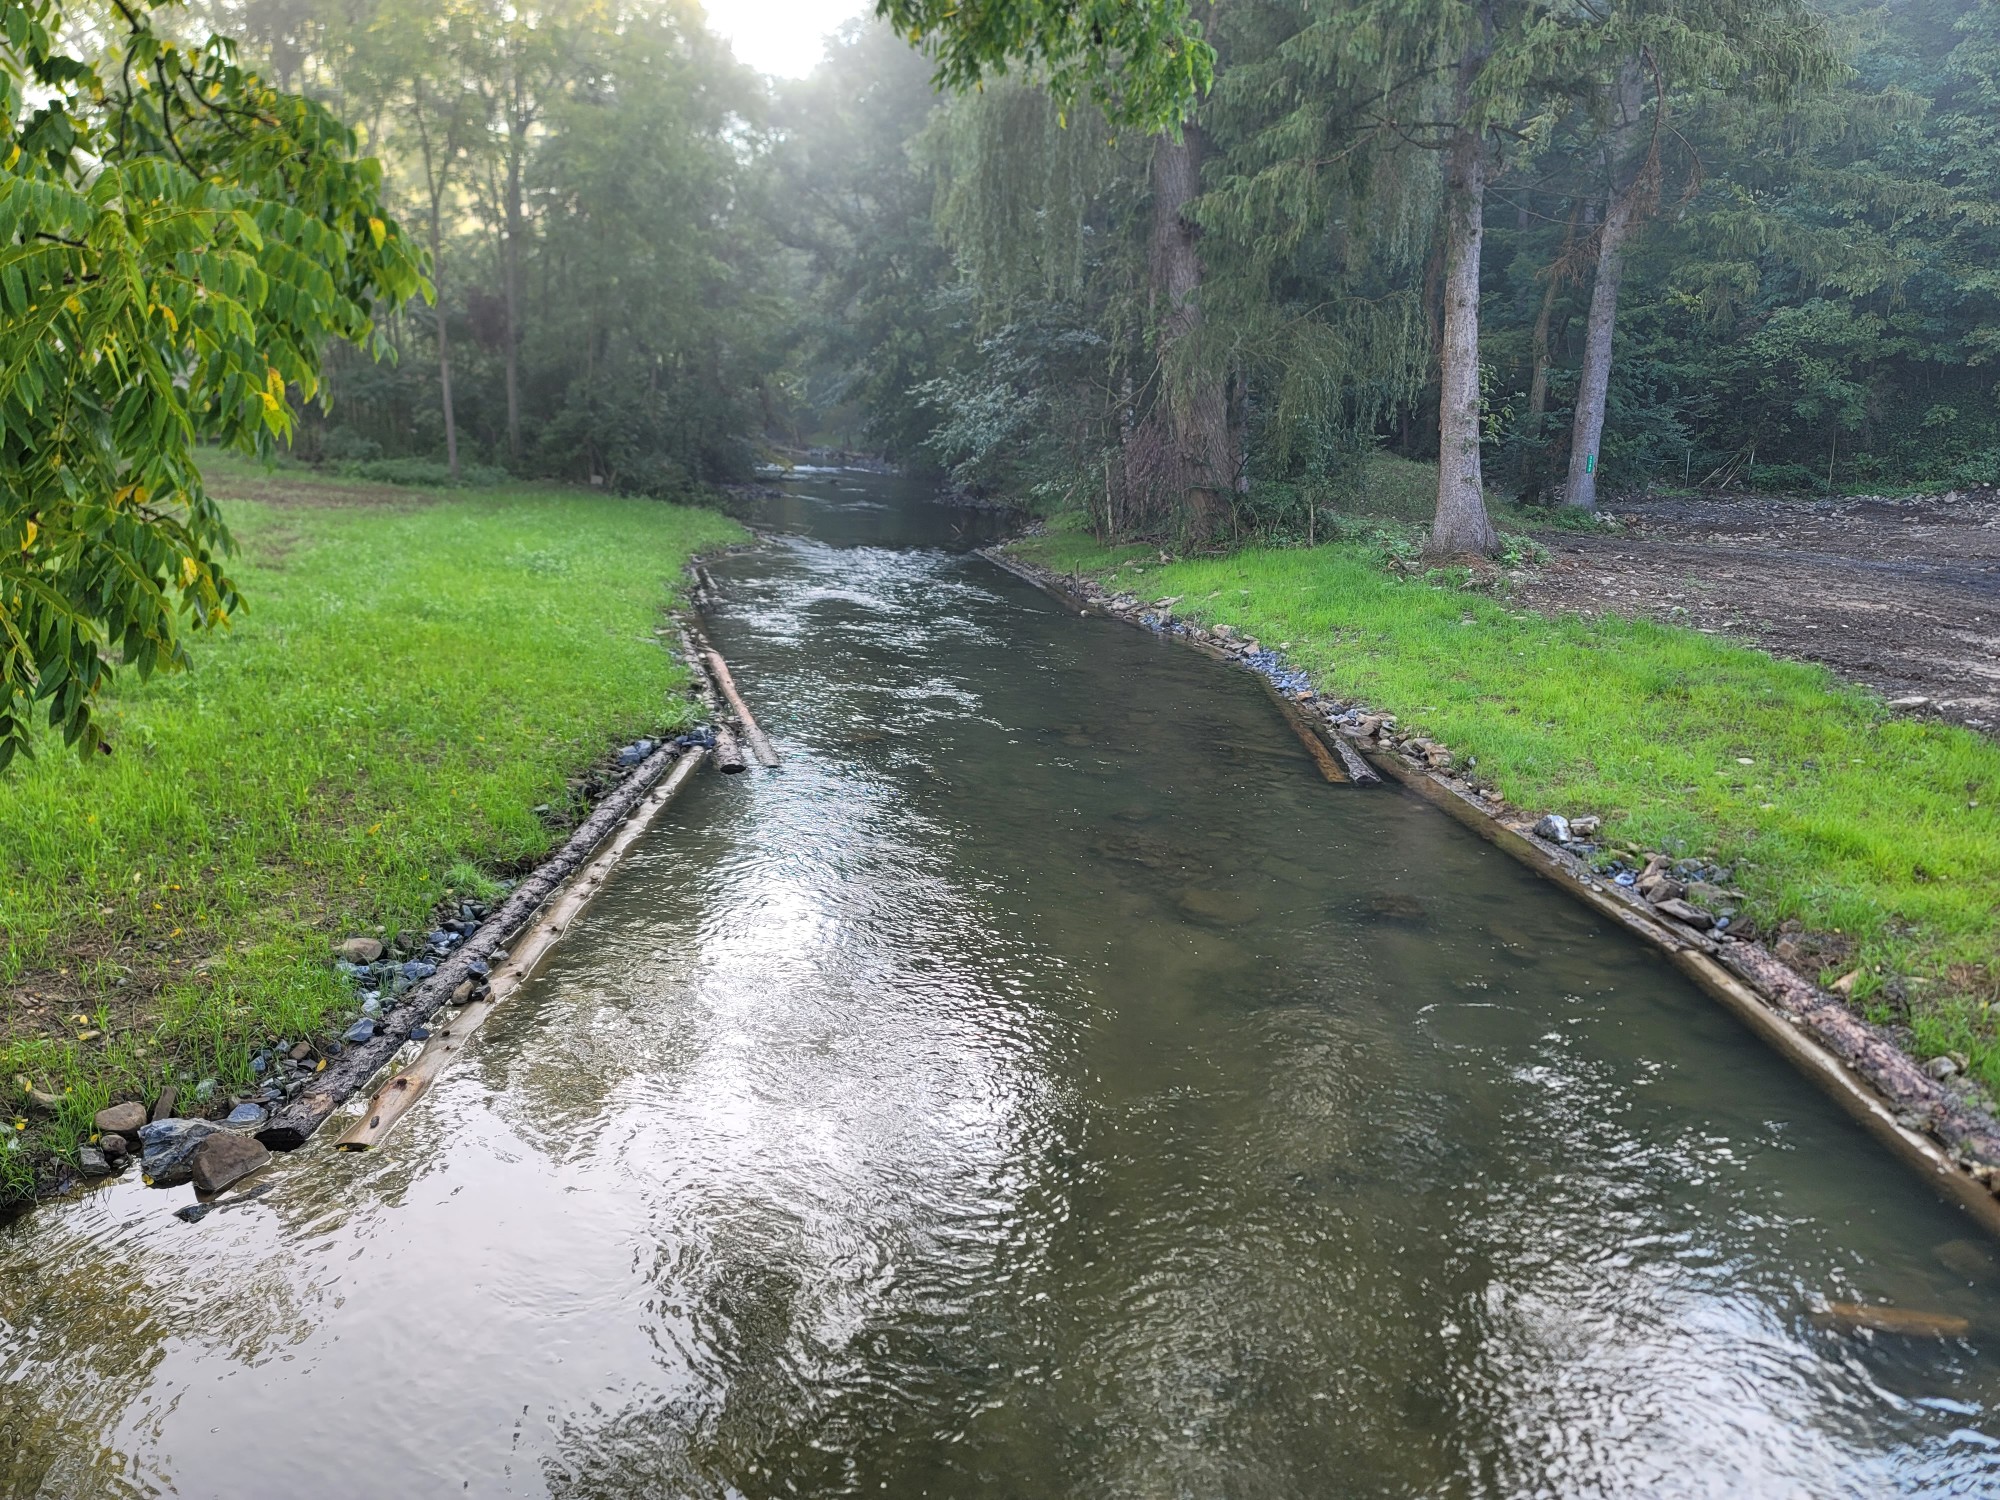 Habitat structures are shown on a flowing stream. Log-framed deflectors run along both banks, which show a wildflower pollinator